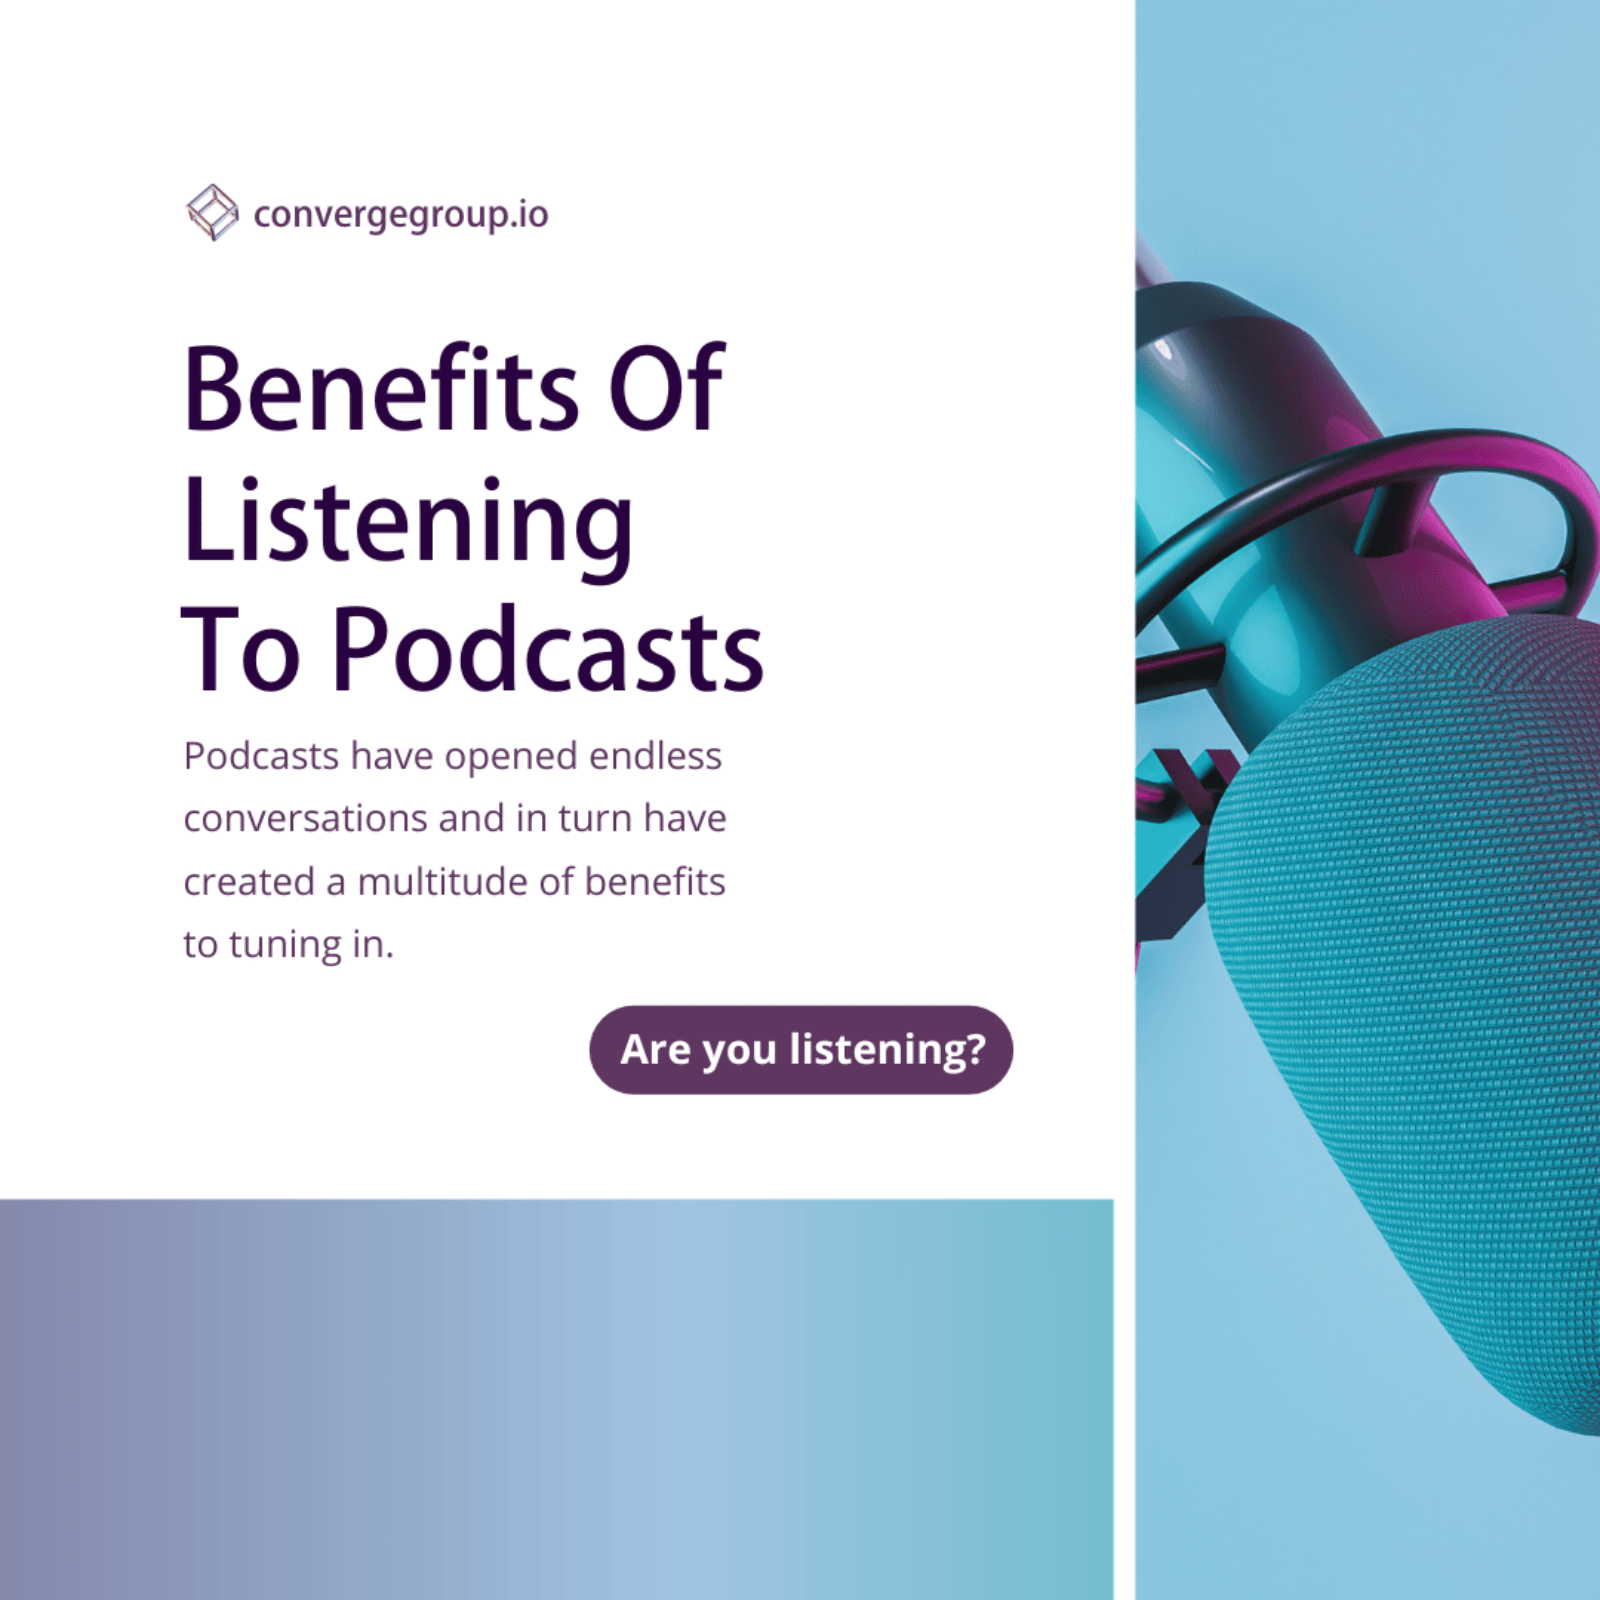 The Benefits Of Listening To Podcasts